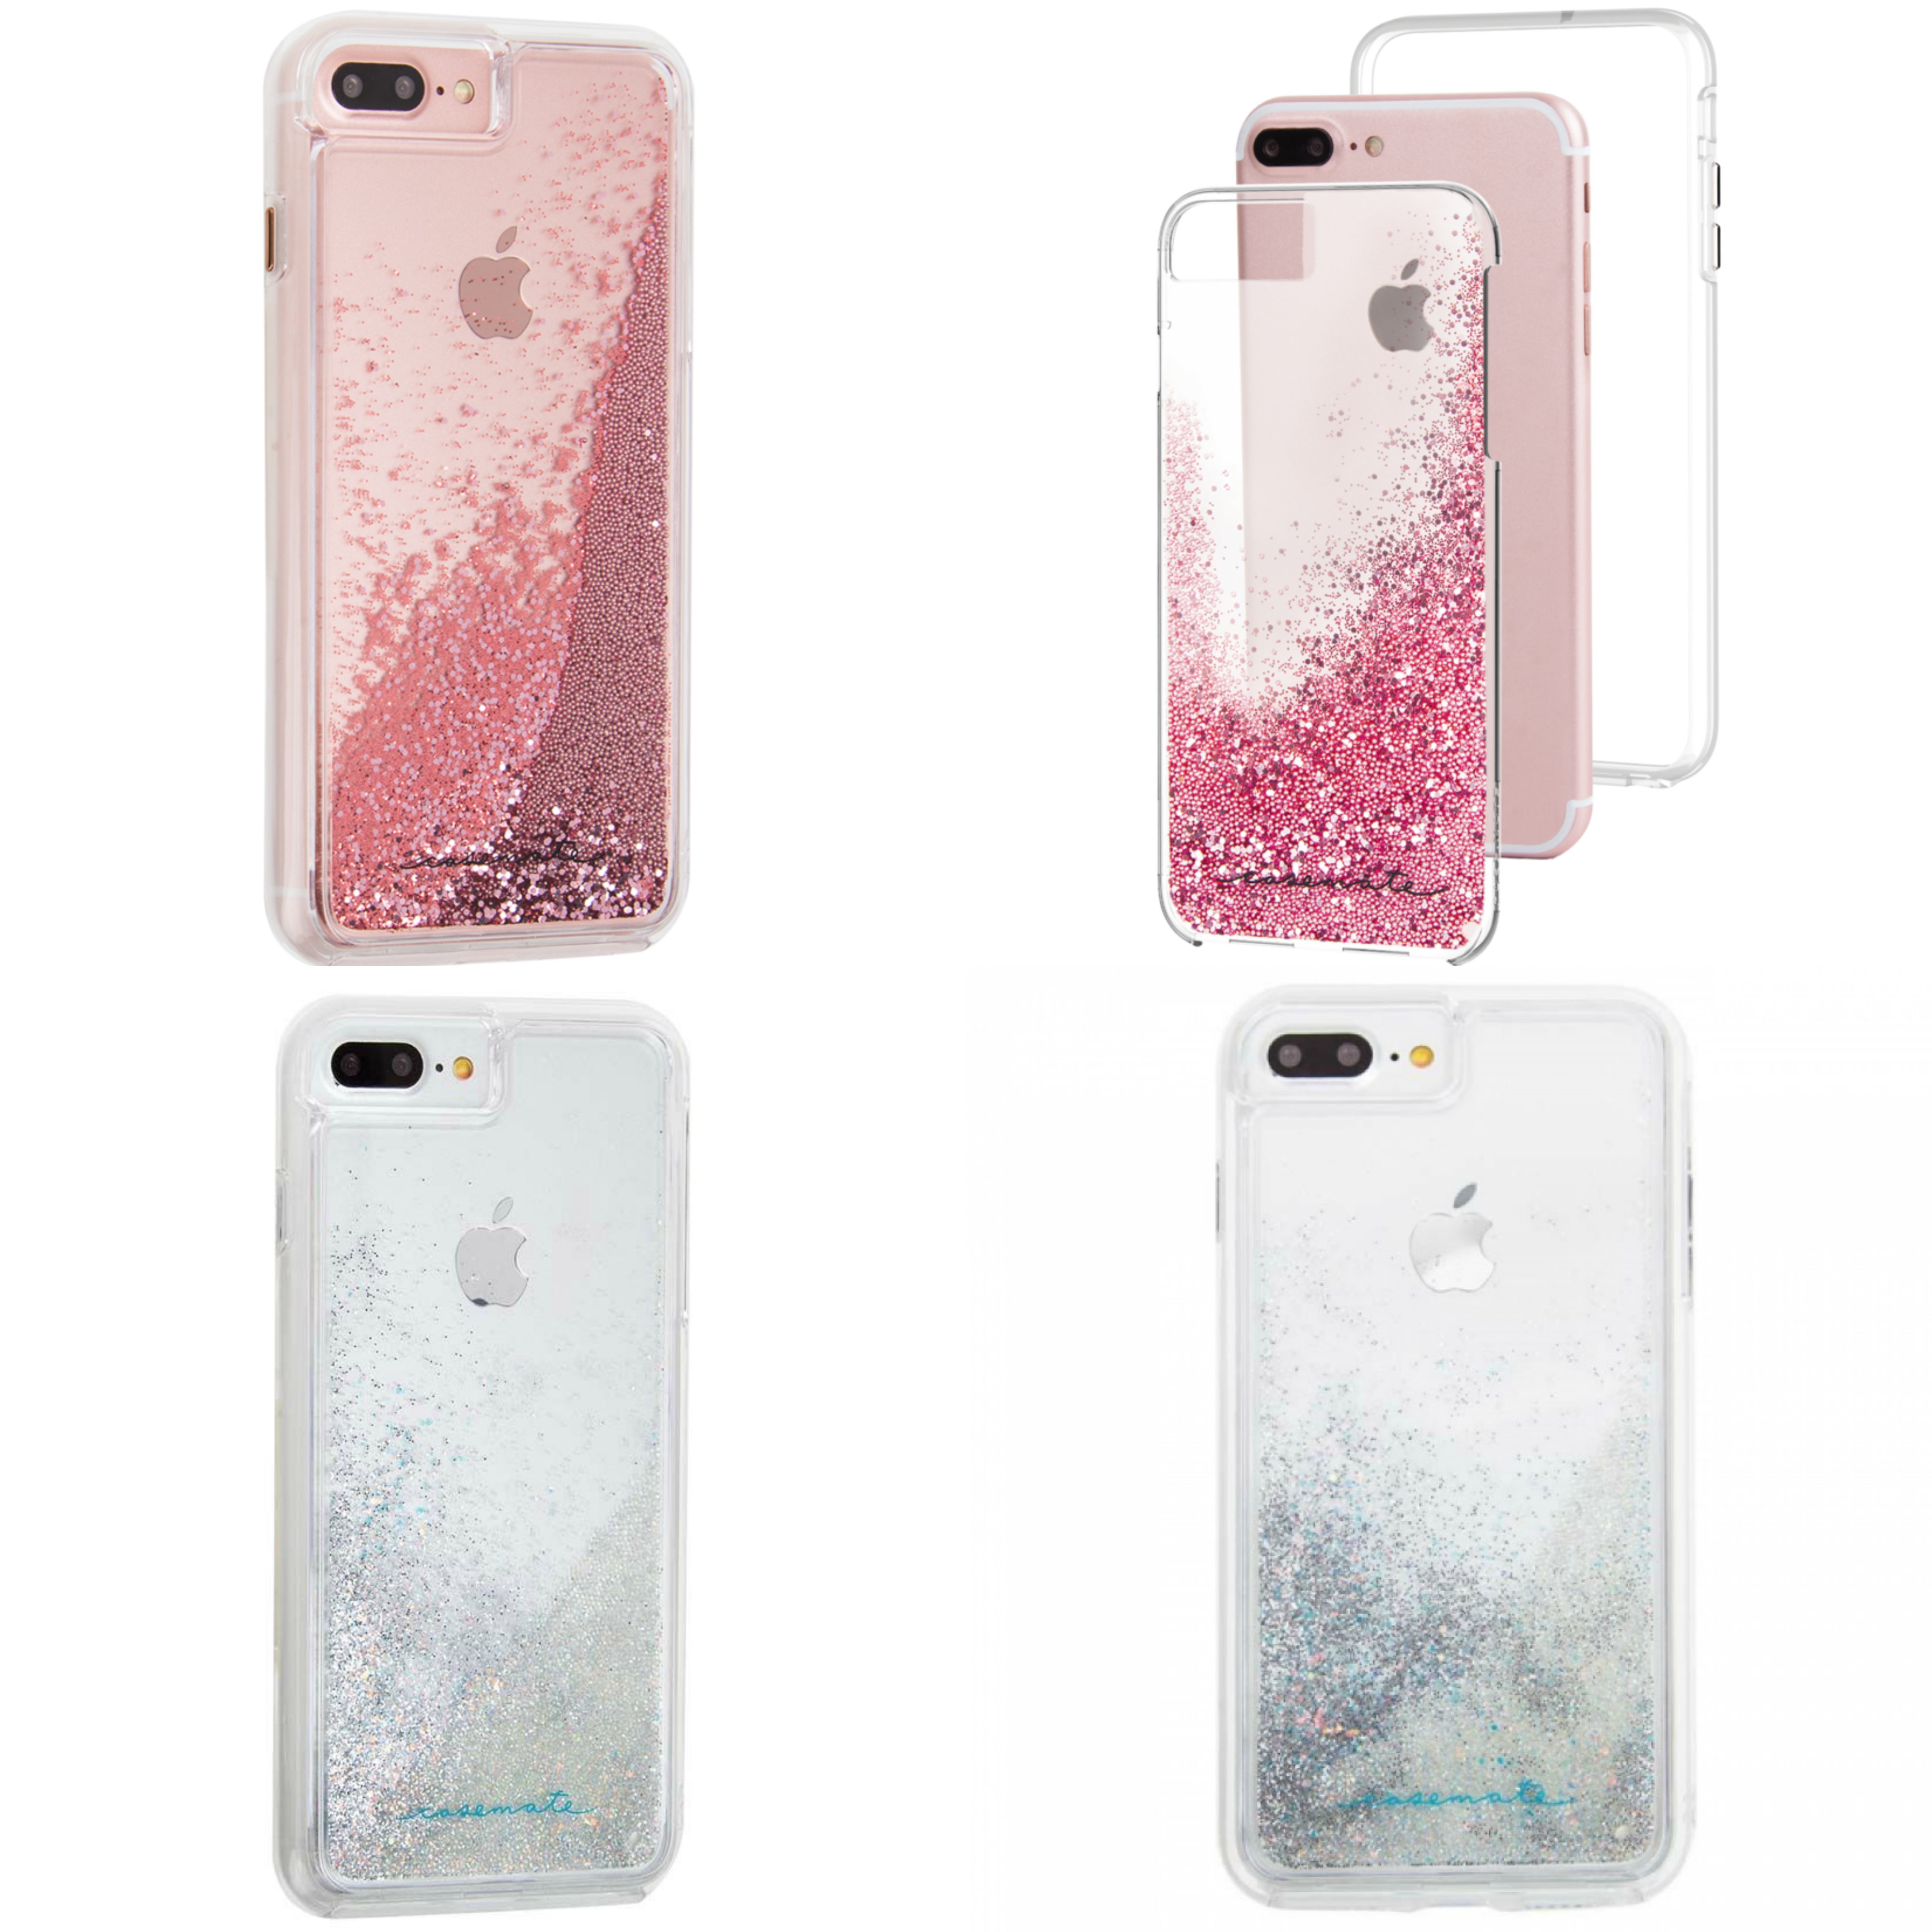 Case-Mate Naked Tough Waterfall Case for iPhone Sparkling Dual Protective  Cover